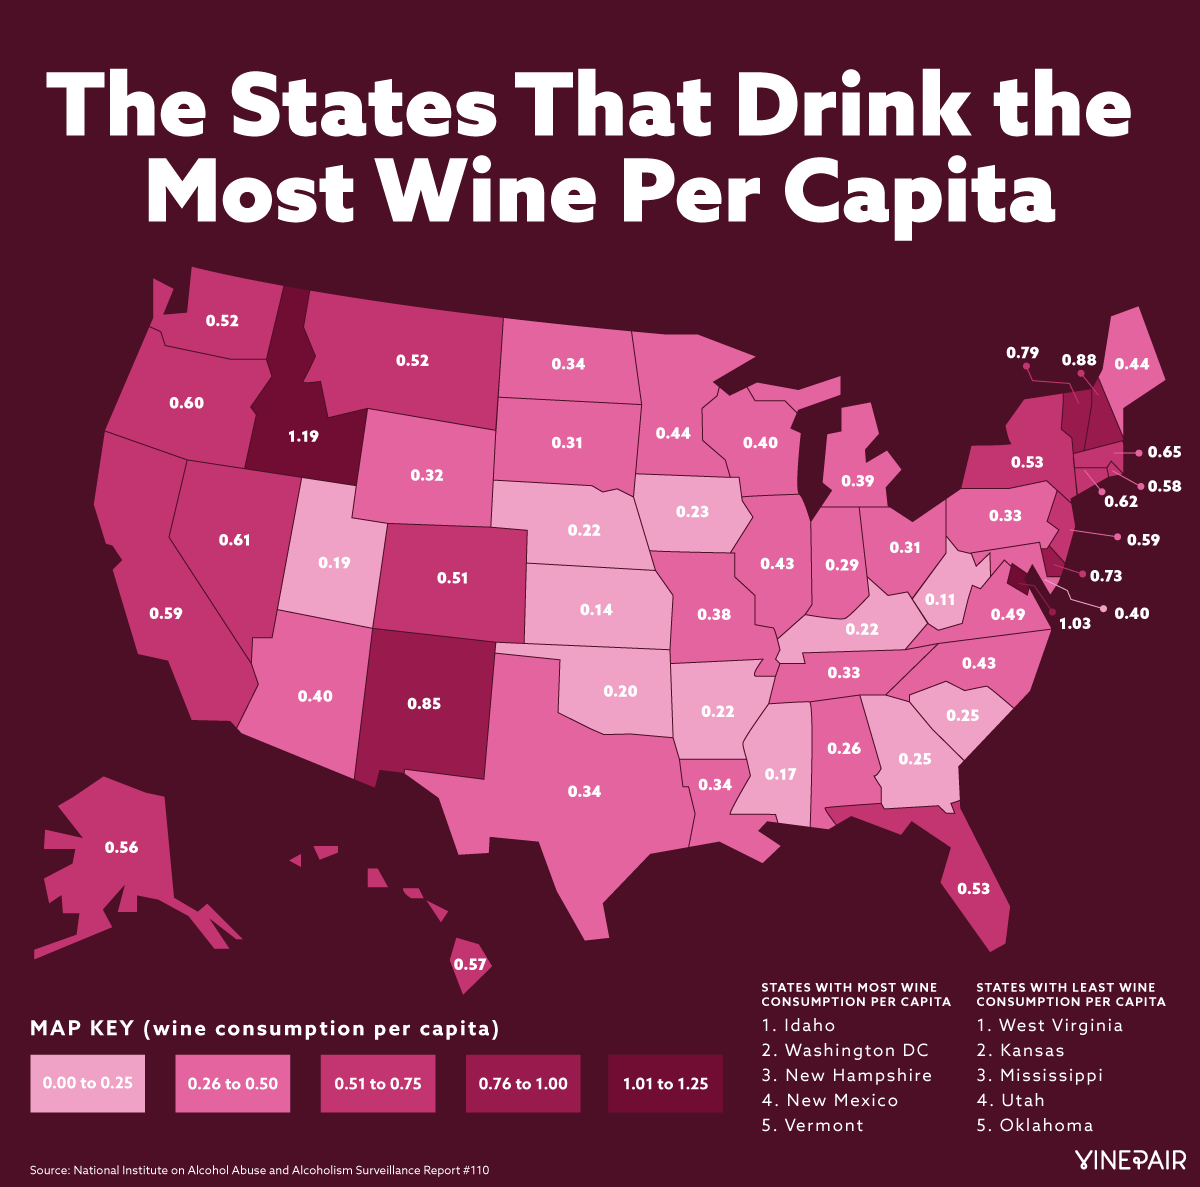 The States that Drink the Most Wine in America